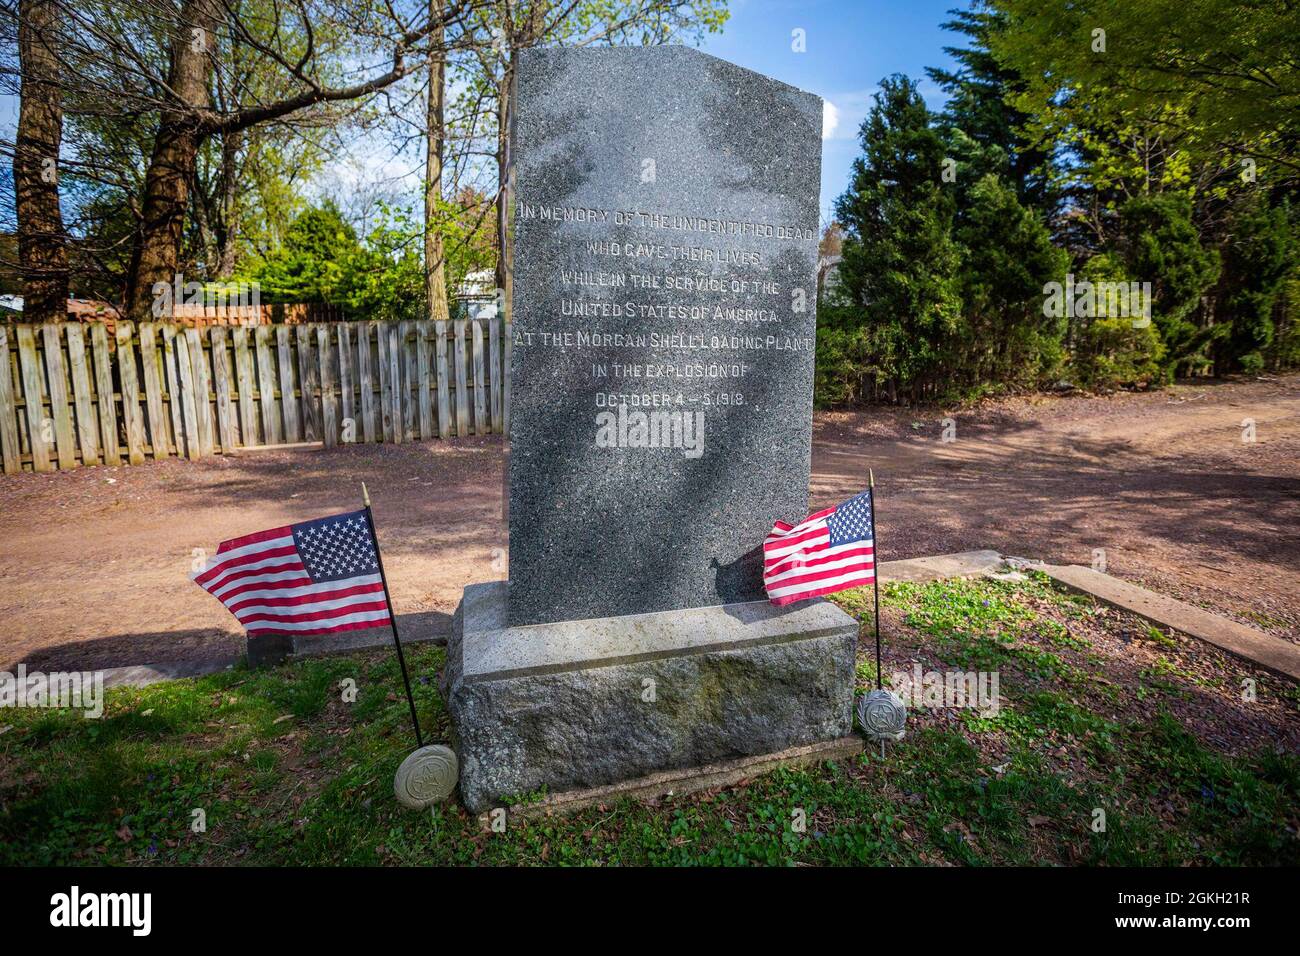 The T.A. Gillespie Company Shell Loading Plant Explosion Memorial at Parlin, N.J., April 20, 2021. The memorial, which is located at the Ernst Memorial Cemetery on 328 Ernston Road, honors the more than 100 people who were killed Oct. 4, 1918, at a World War I munitions plant in Sayreville, N.J. The facility and more than 300 surrounding buildings were destroyed. The first explosion caused a fire with ensuing explosions continuing for three days. Unexploded ordnance has been found as recently as 2007. Stock Photo